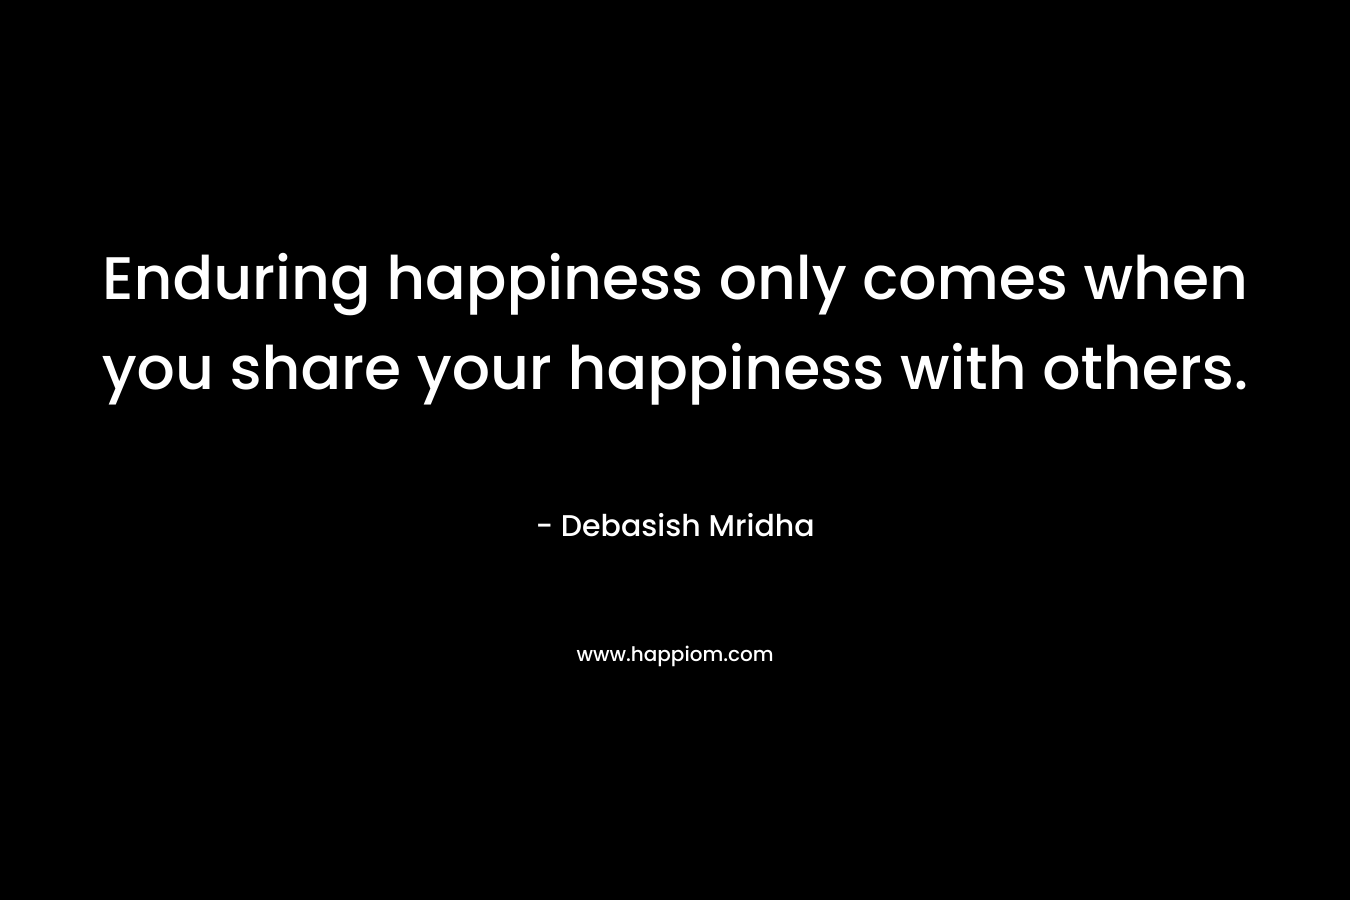 Enduring happiness only comes when you share your happiness with others.